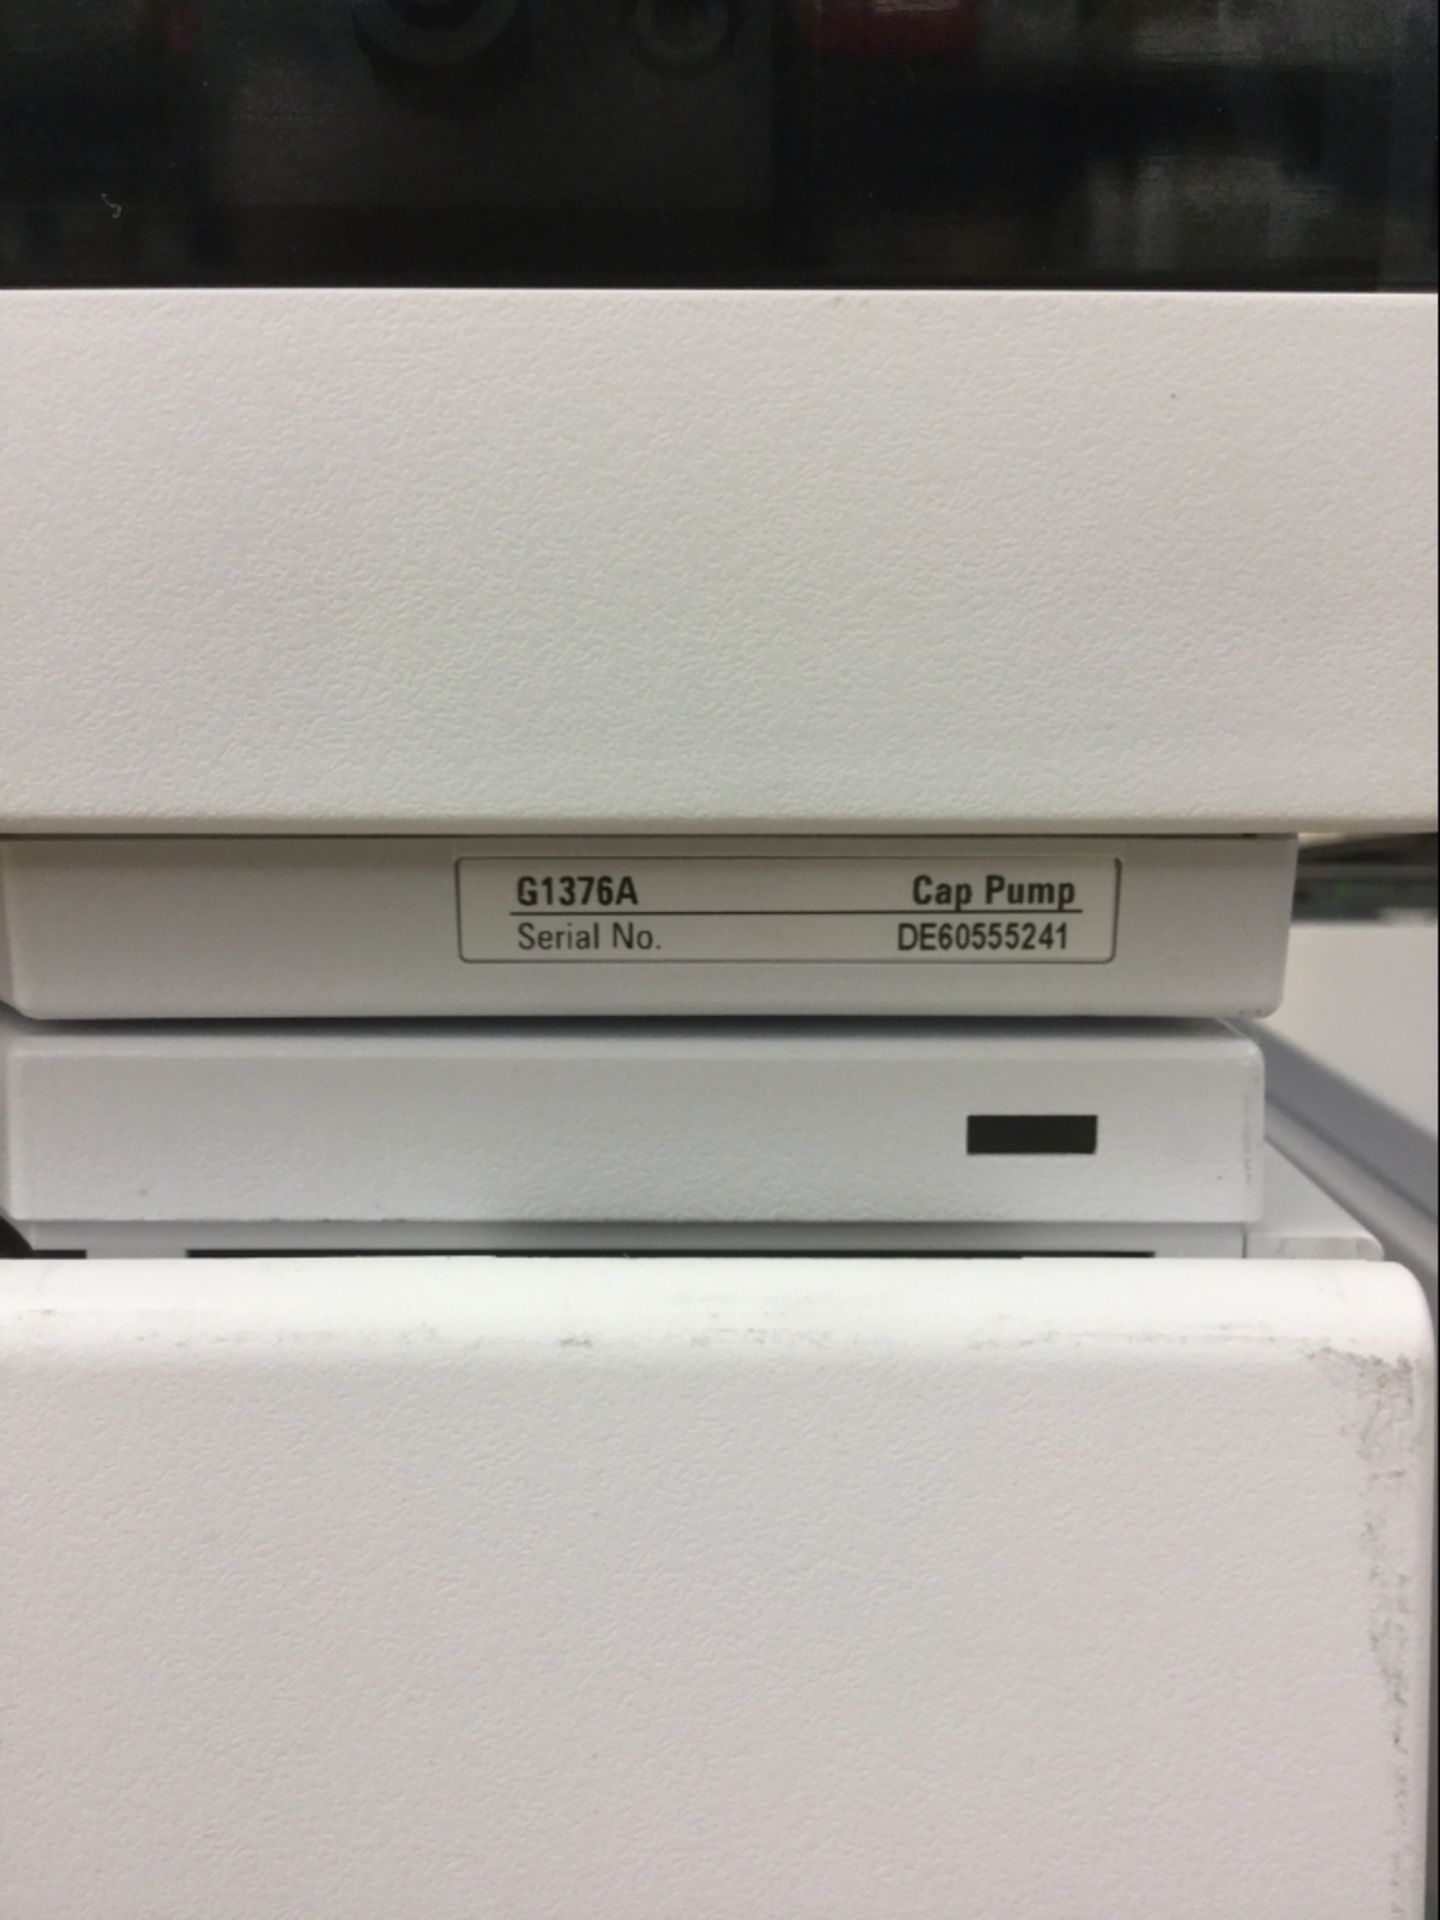 Agilent 1200 Series HPLC System - Image 4 of 7